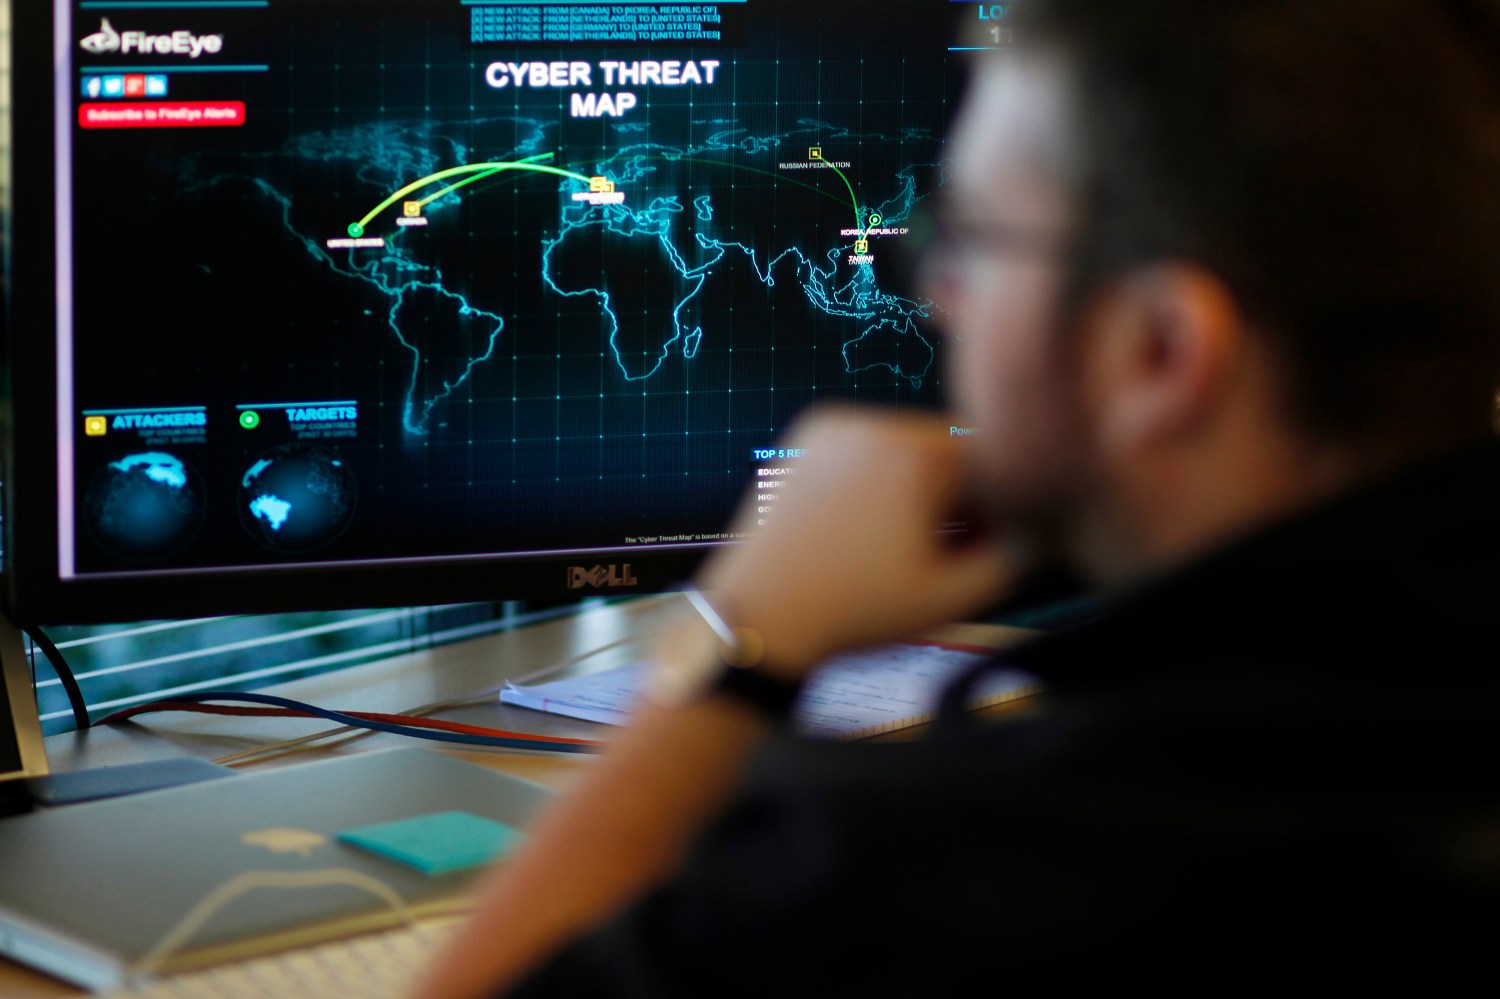 A FireEye information analyst works in front of a screen showing a near real-time map tracking cyber threats at the FireEye office in Milpitas, California, December 29, 2014. FireEye is the security firm hired by Sony to investigate last month's cyberattack against Sony Pictures. Picture taken December 29.     REUTERS/Beck Diefenbach (UNITED STATES - Tags: BUSINESS SCIENCE TECHNOLOGY CRIME LAW)